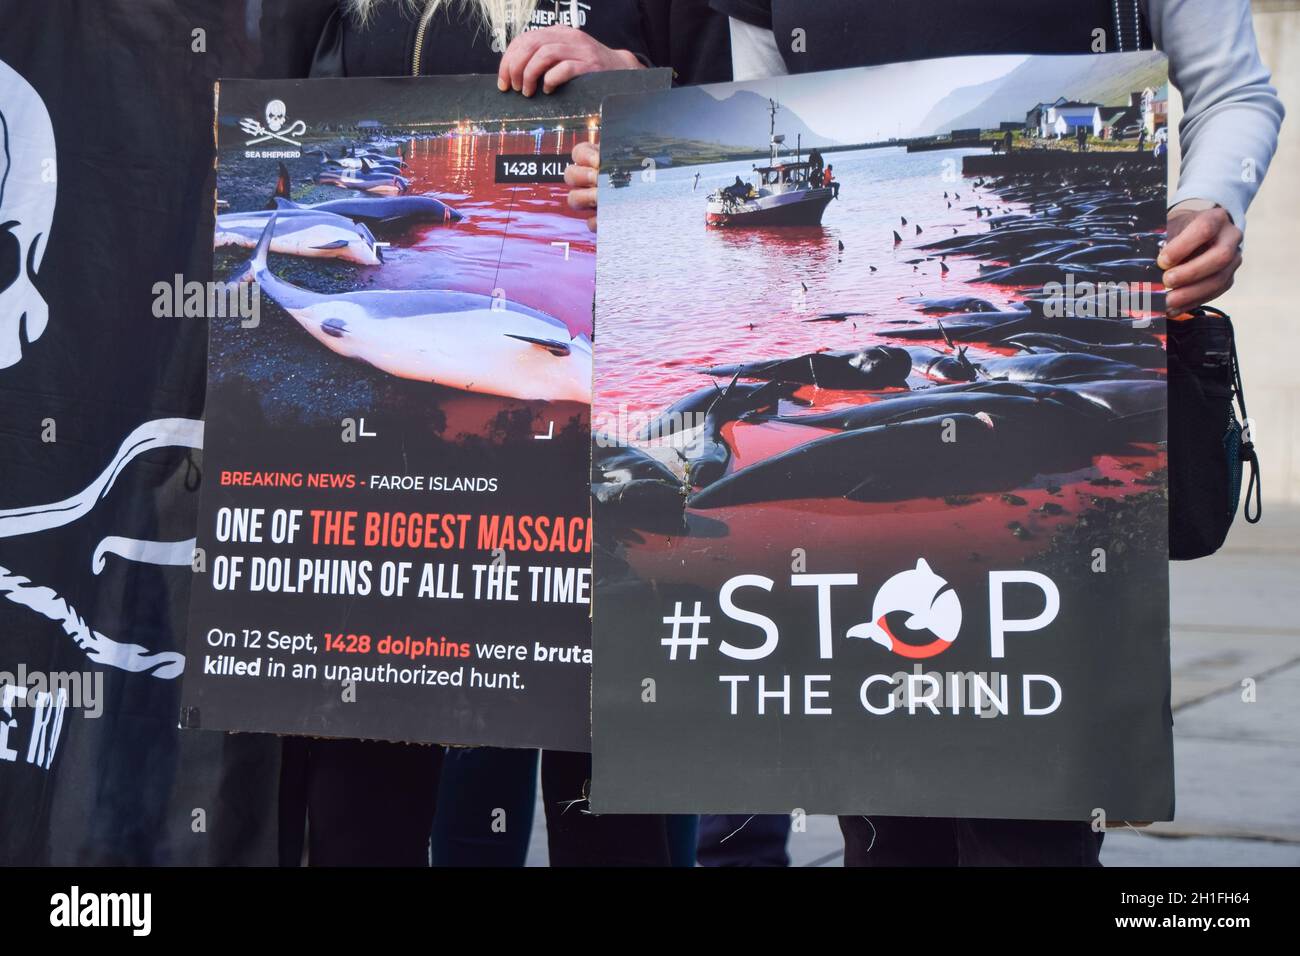 London, UK. 16th October 2021. Protesters in Trafalgar Square. Sea Shepherd and other activists marched through Westminster, calling for an end to the slaughter of dolphins and whales in Faroe Islands and Taiji, Japan. Stock Photo